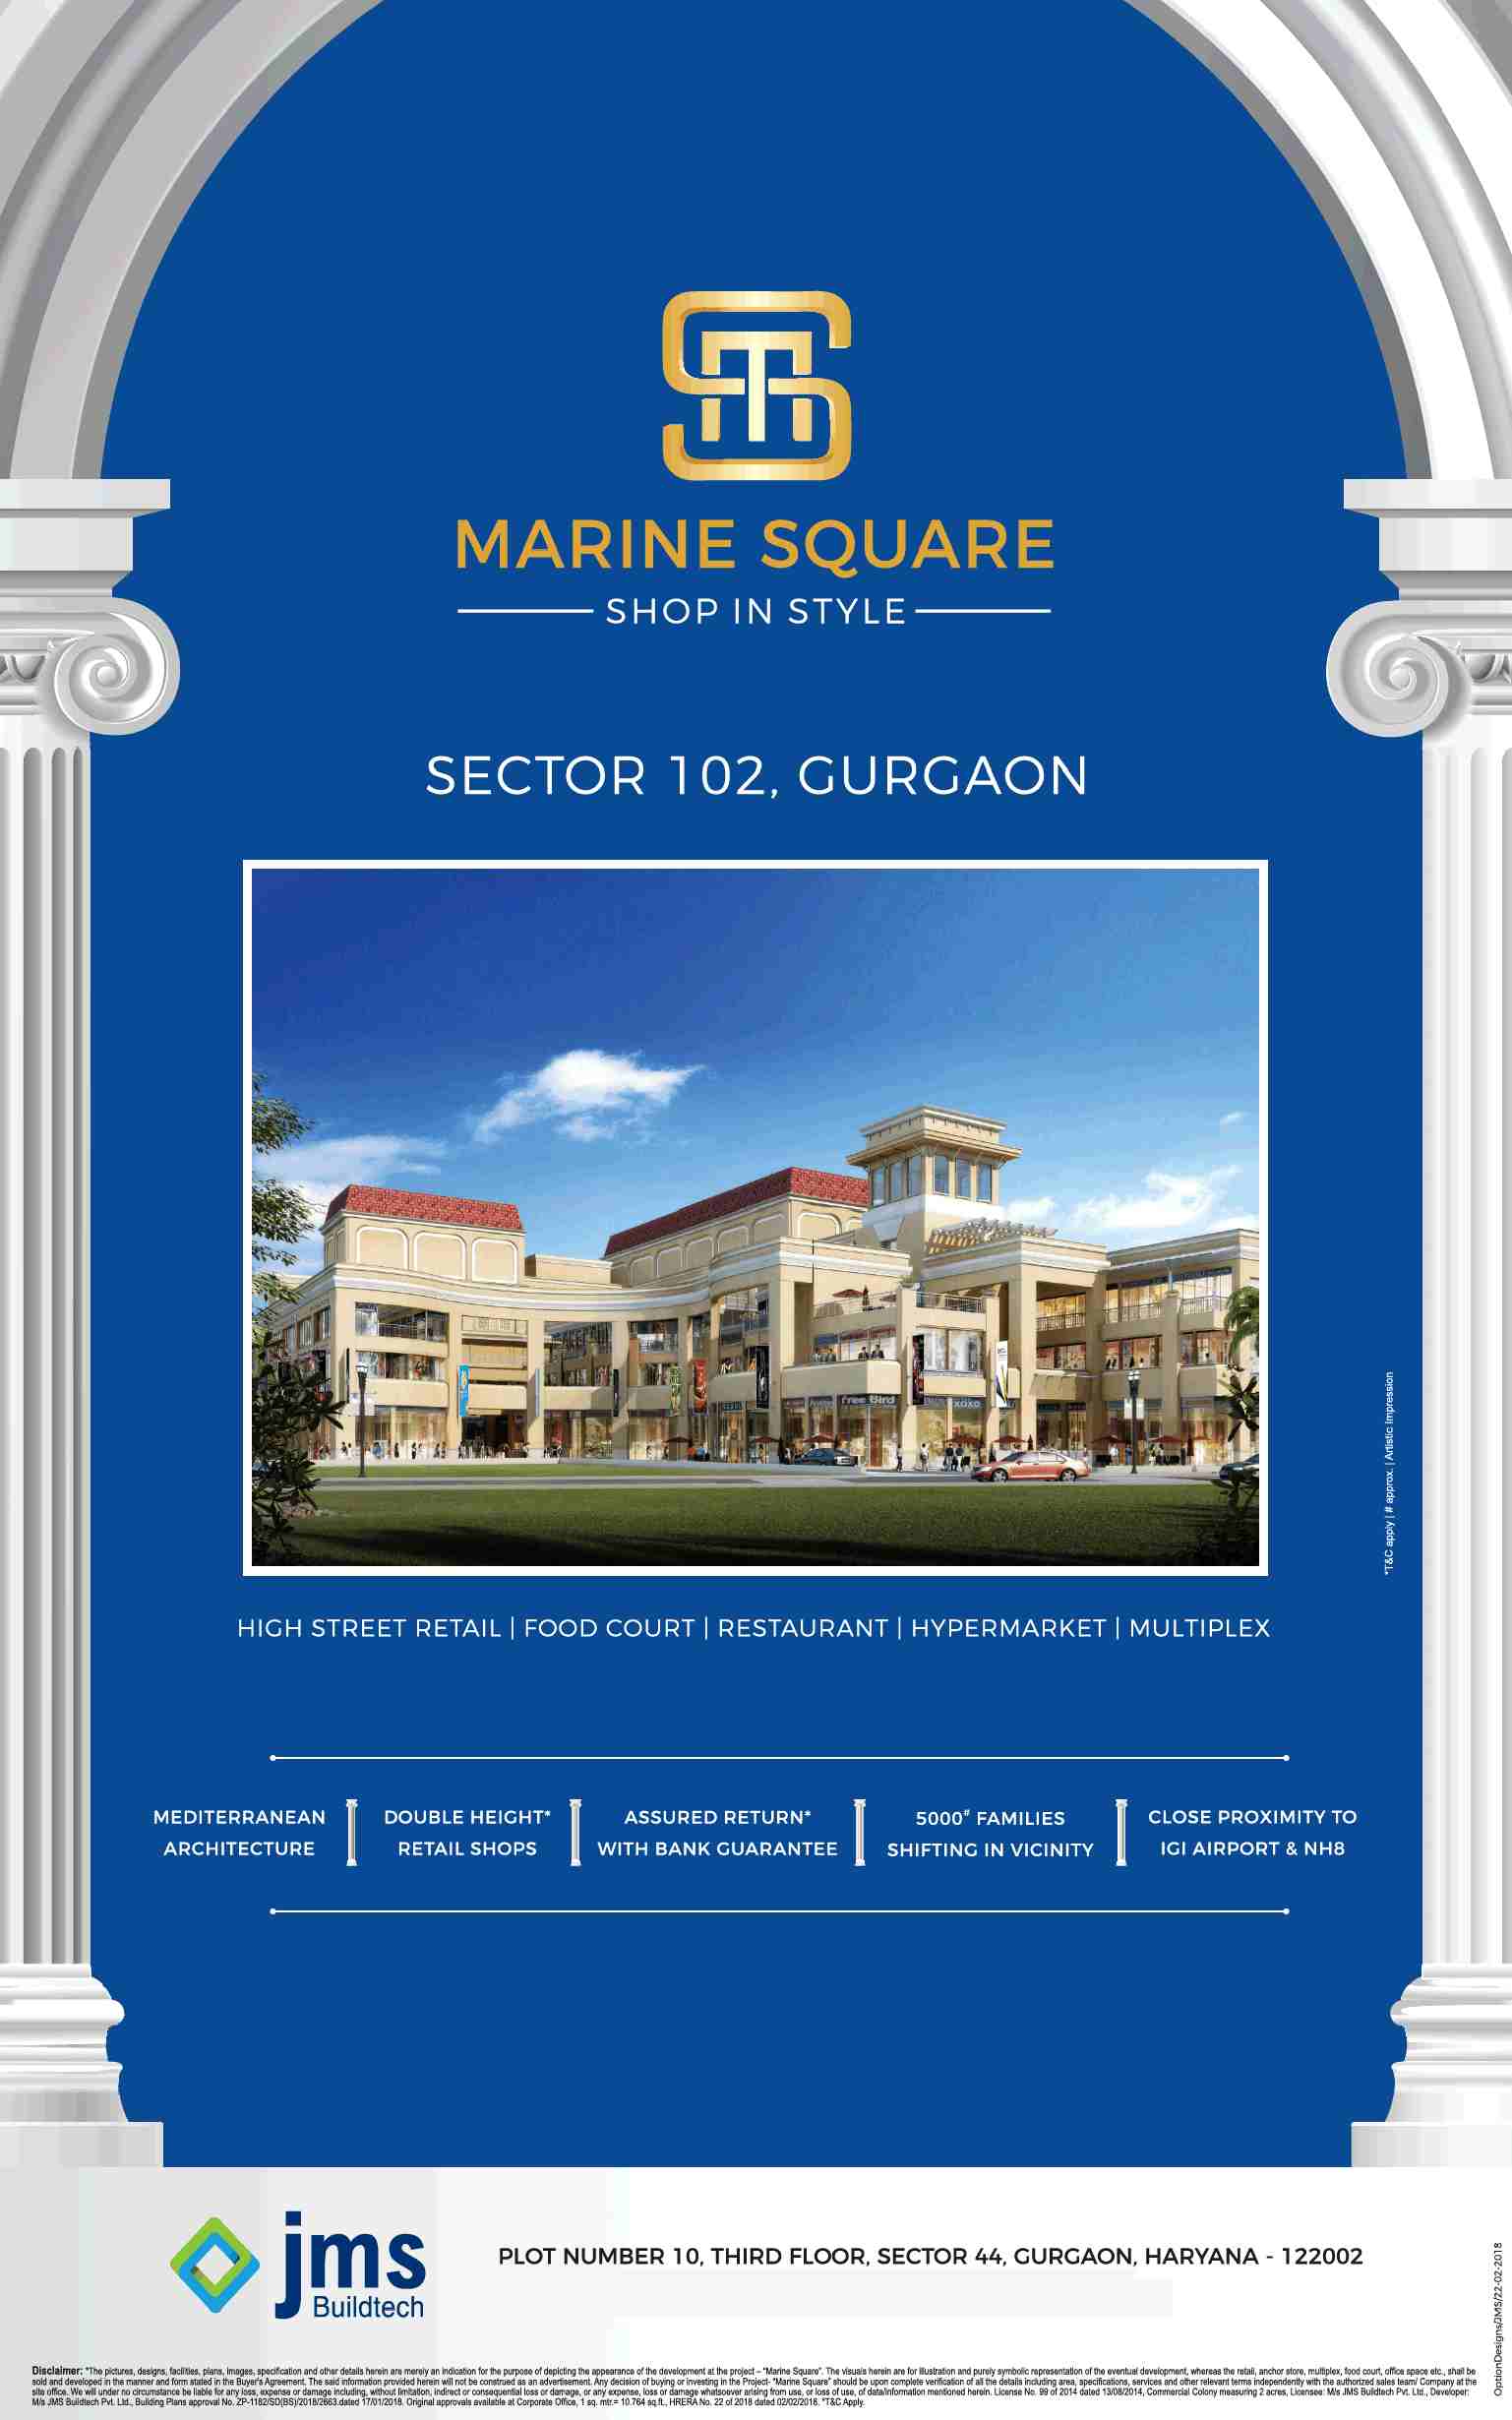 Discover luxurious shopping experience like never before at JMS Marine Square in Gurgaon